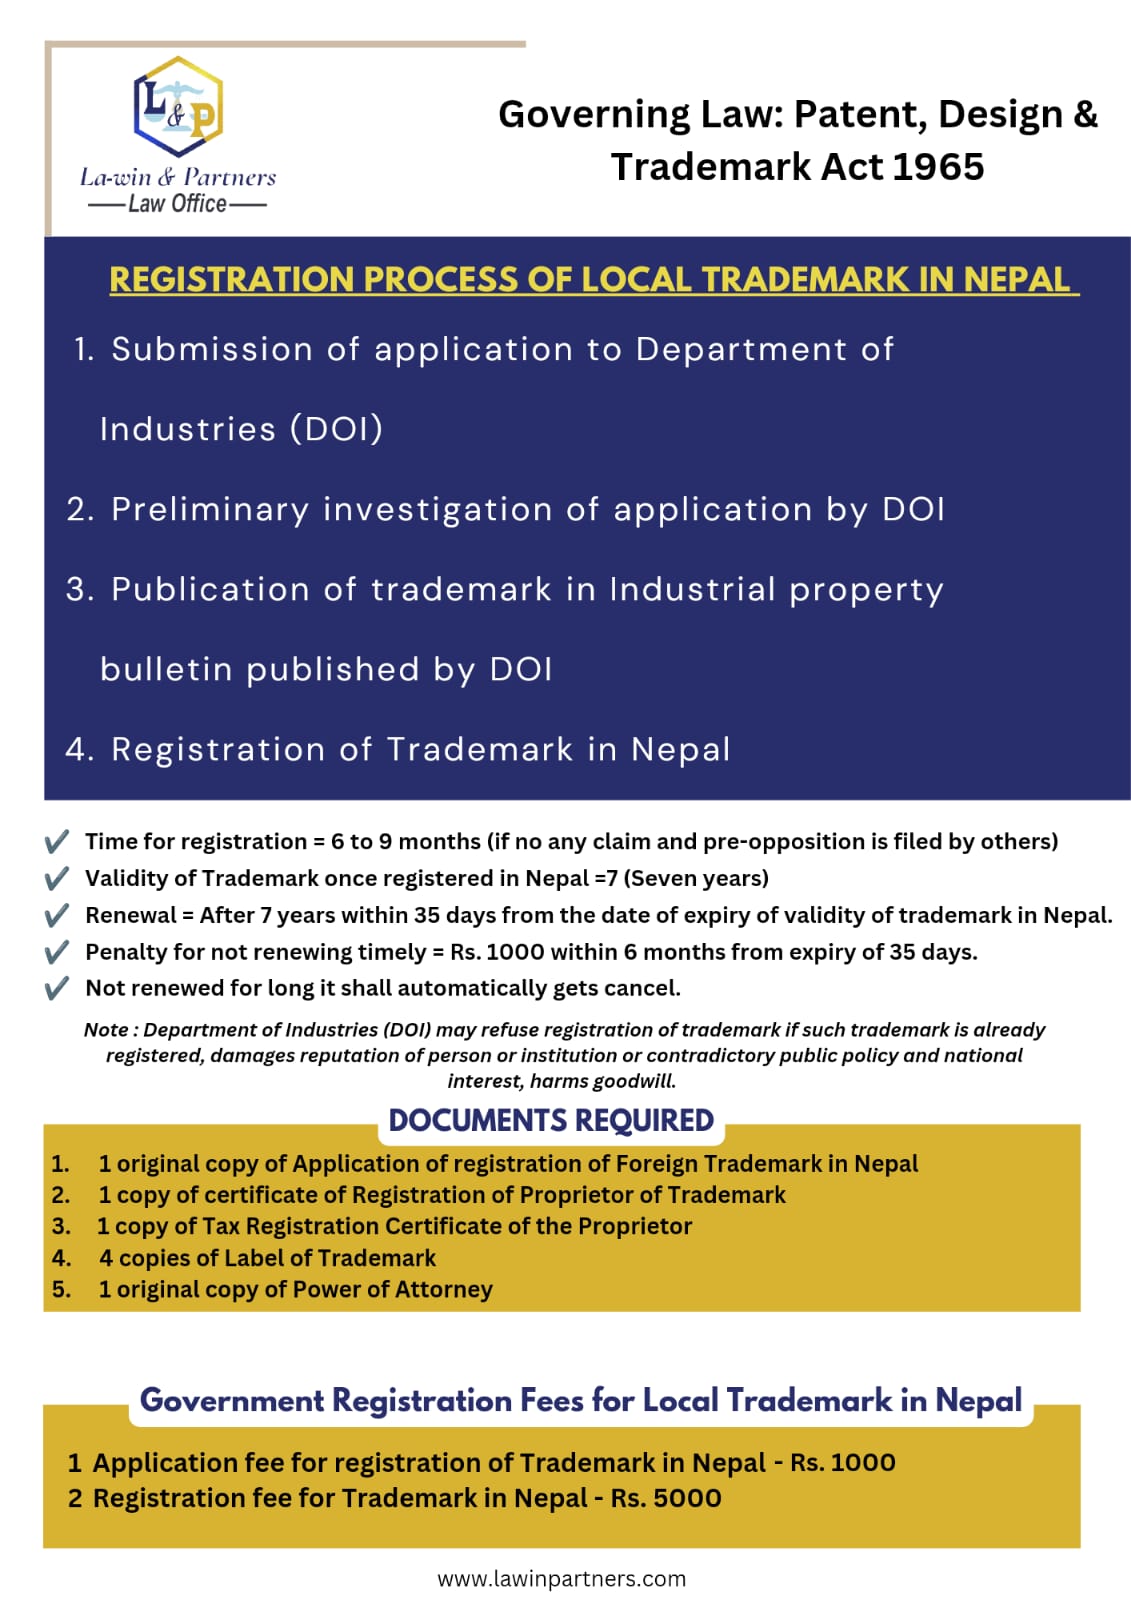 Process of Registration of Local Trademark in Nepal